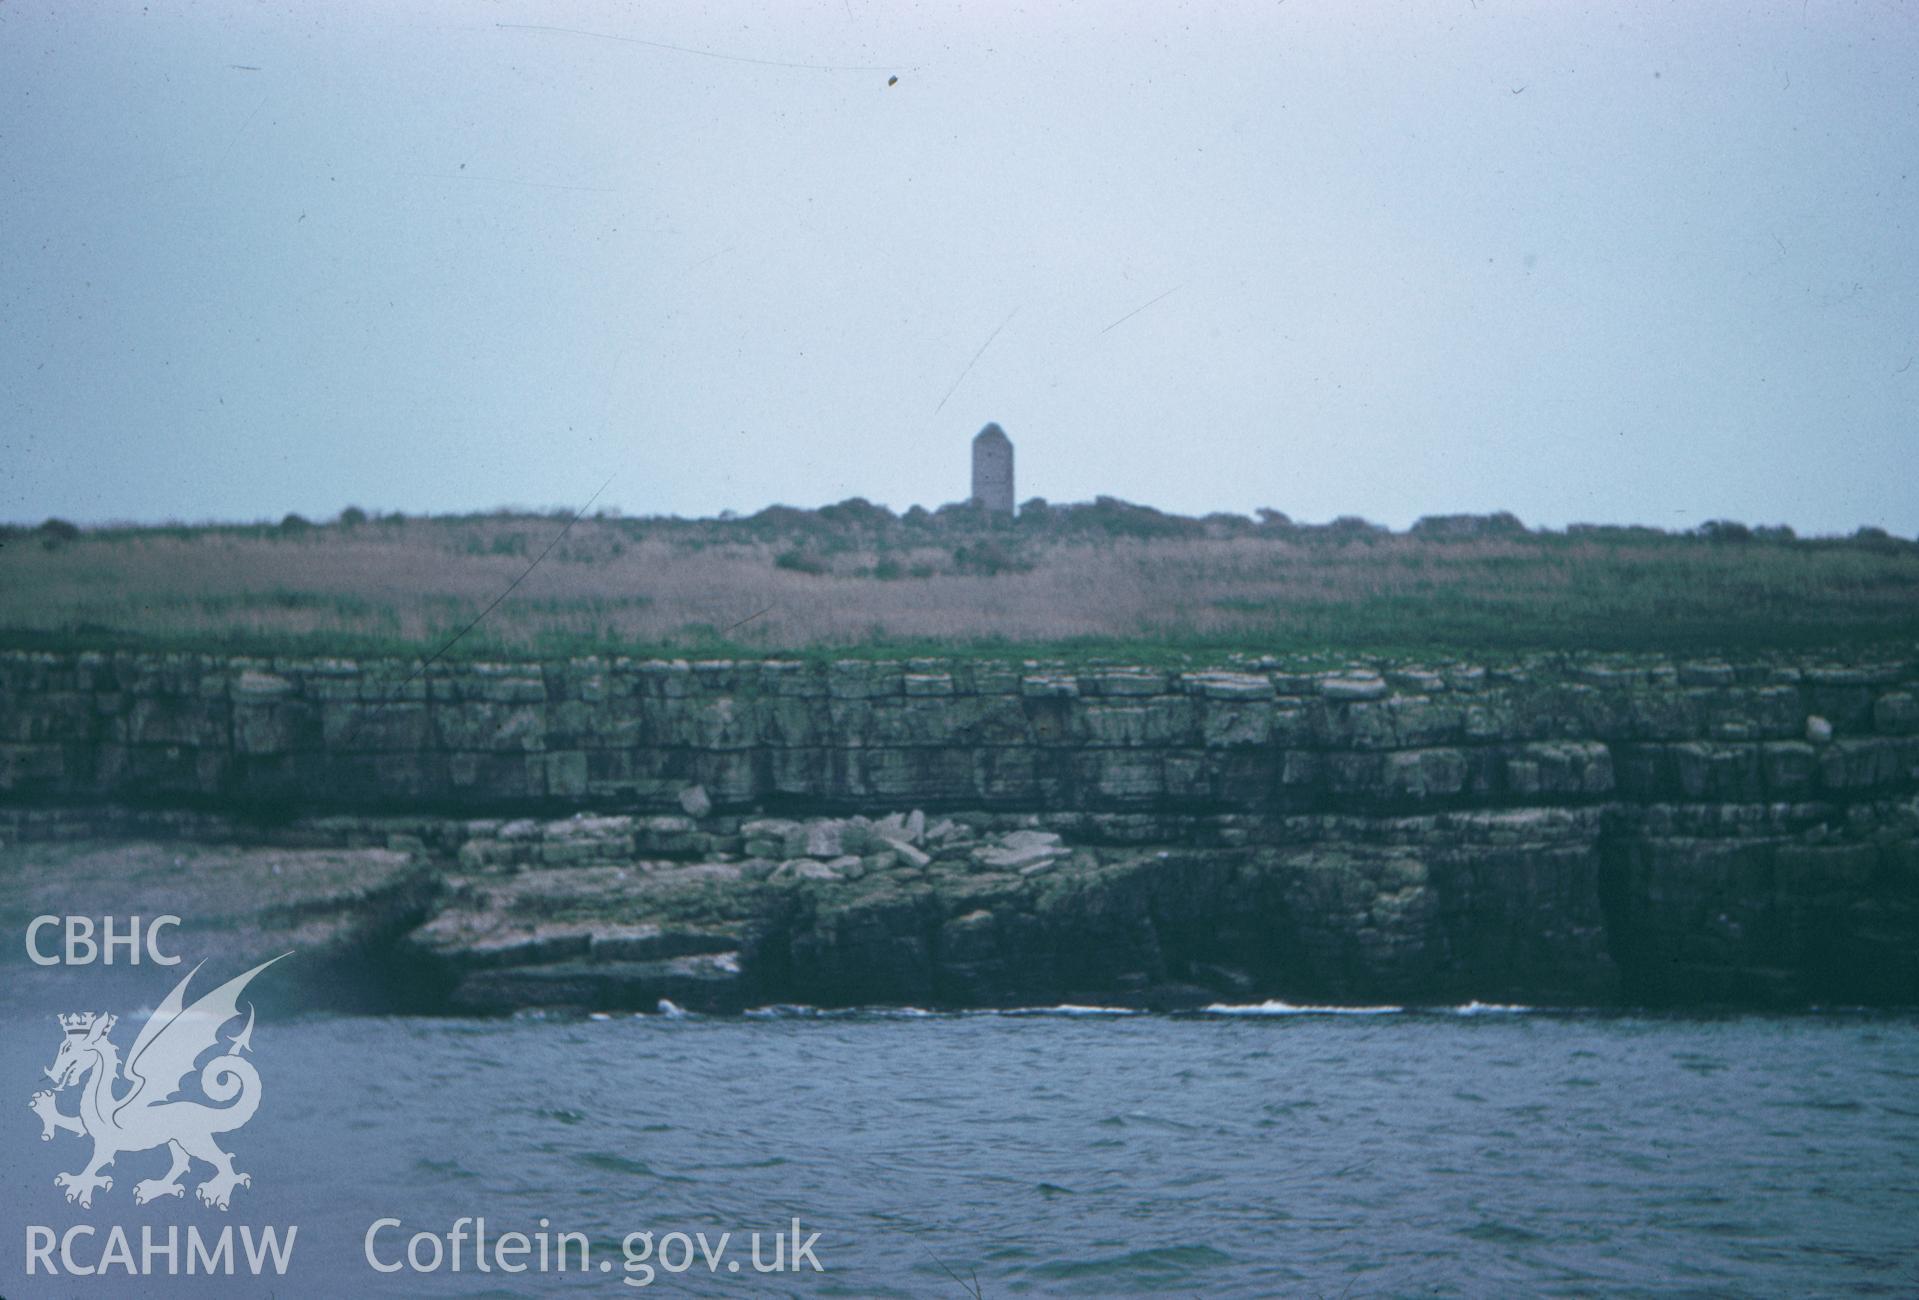 Colour slide showing view of Puffin Island.